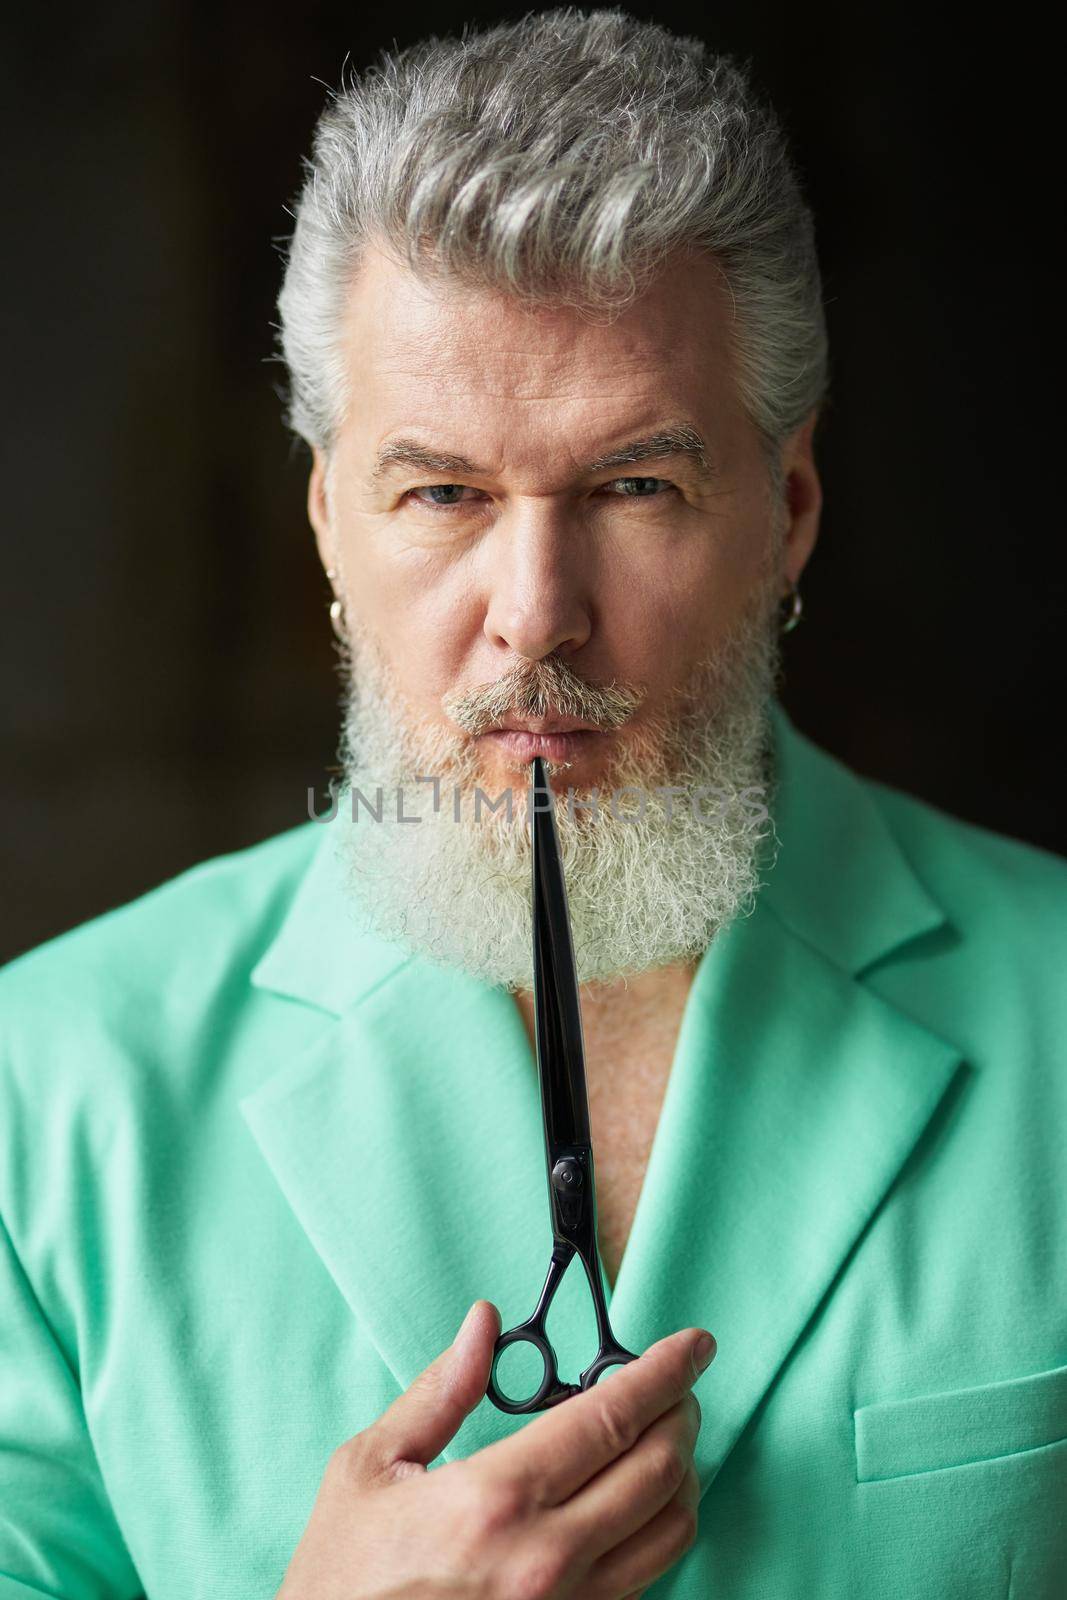 Portrait of serious gray haired mature man with beard wearing colorful outfit looking at camera, holding sharp barber scissors near his face, posing over dark background by friendsstock